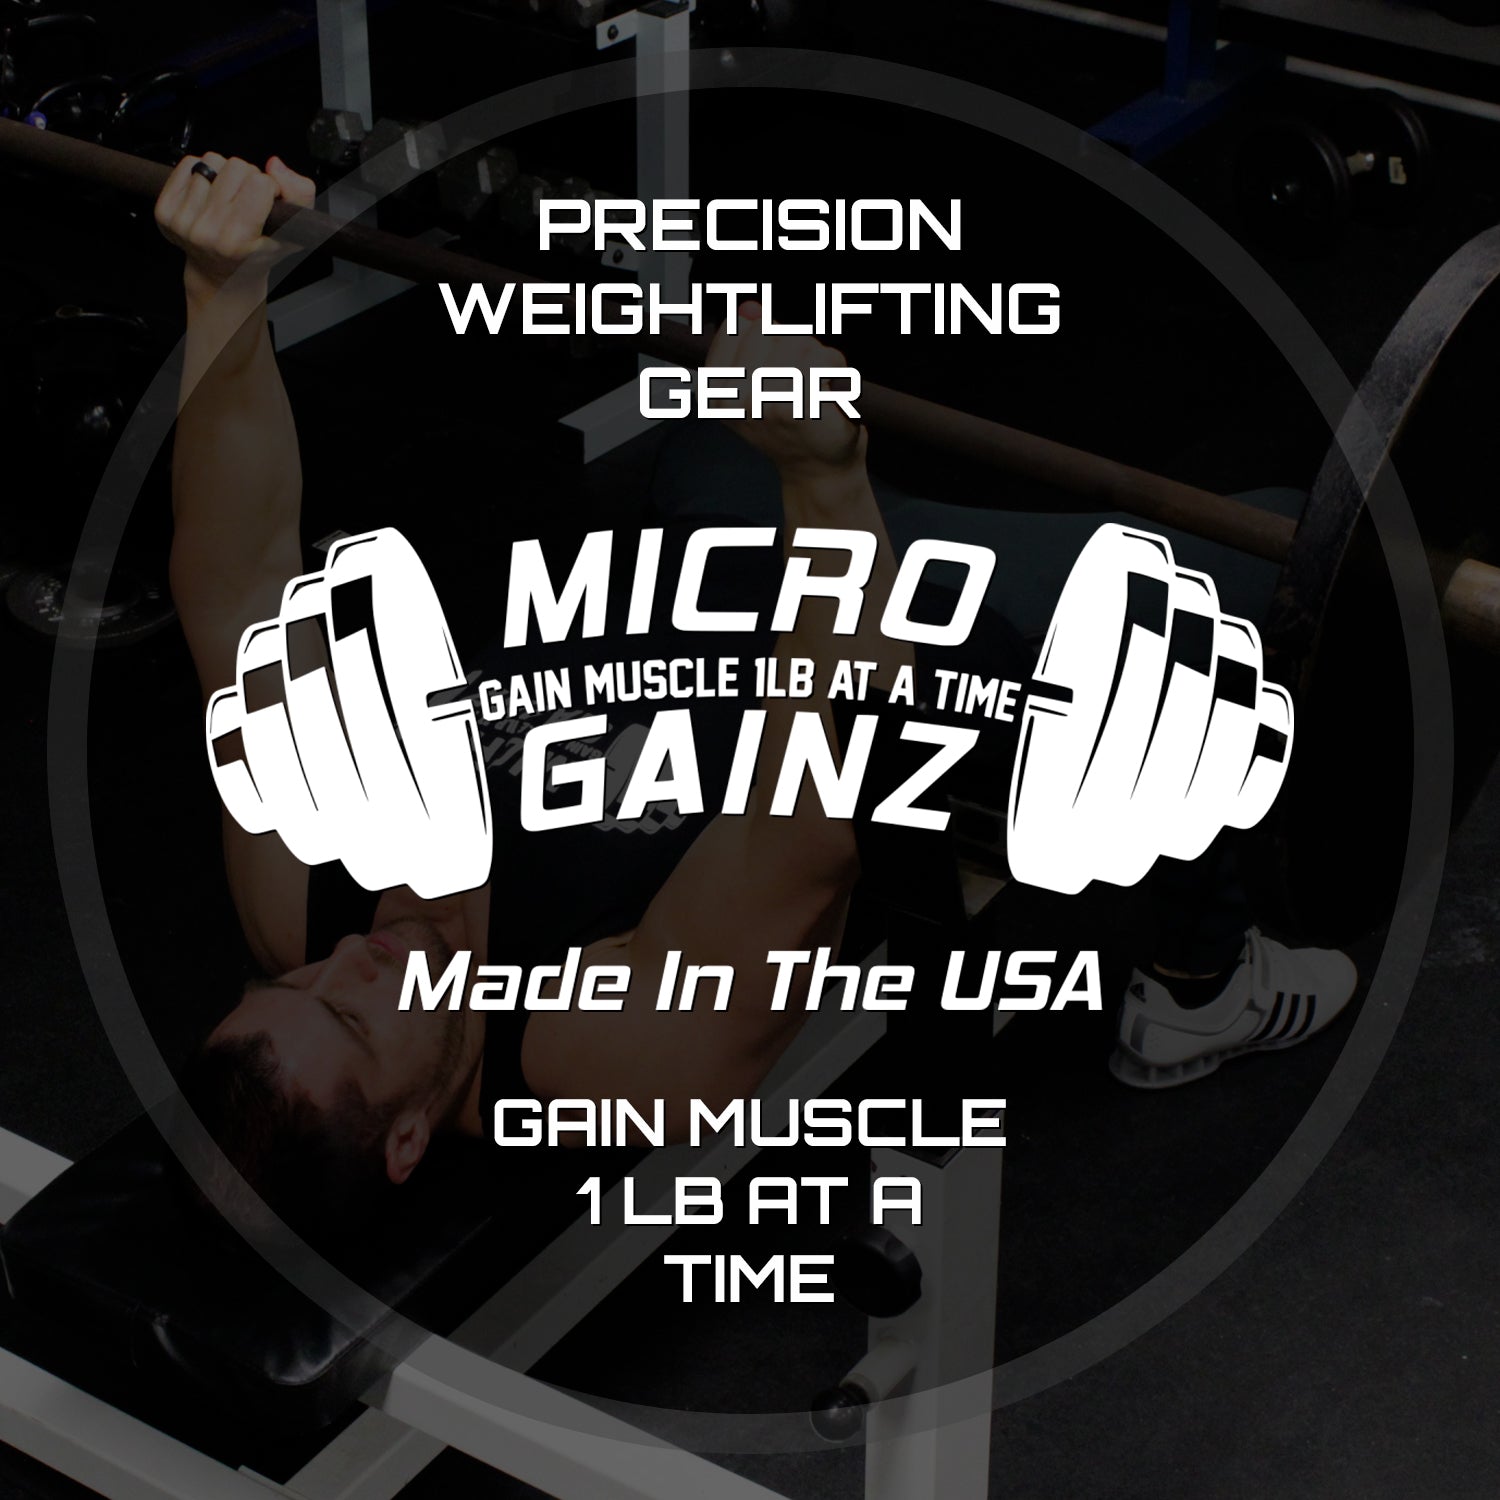 Micro Gainz Olympic Size Kilogram Fractional Weight Plates Set of 6 Steel Plates (2-.25KG, 2-.50KG, 2-1KG)